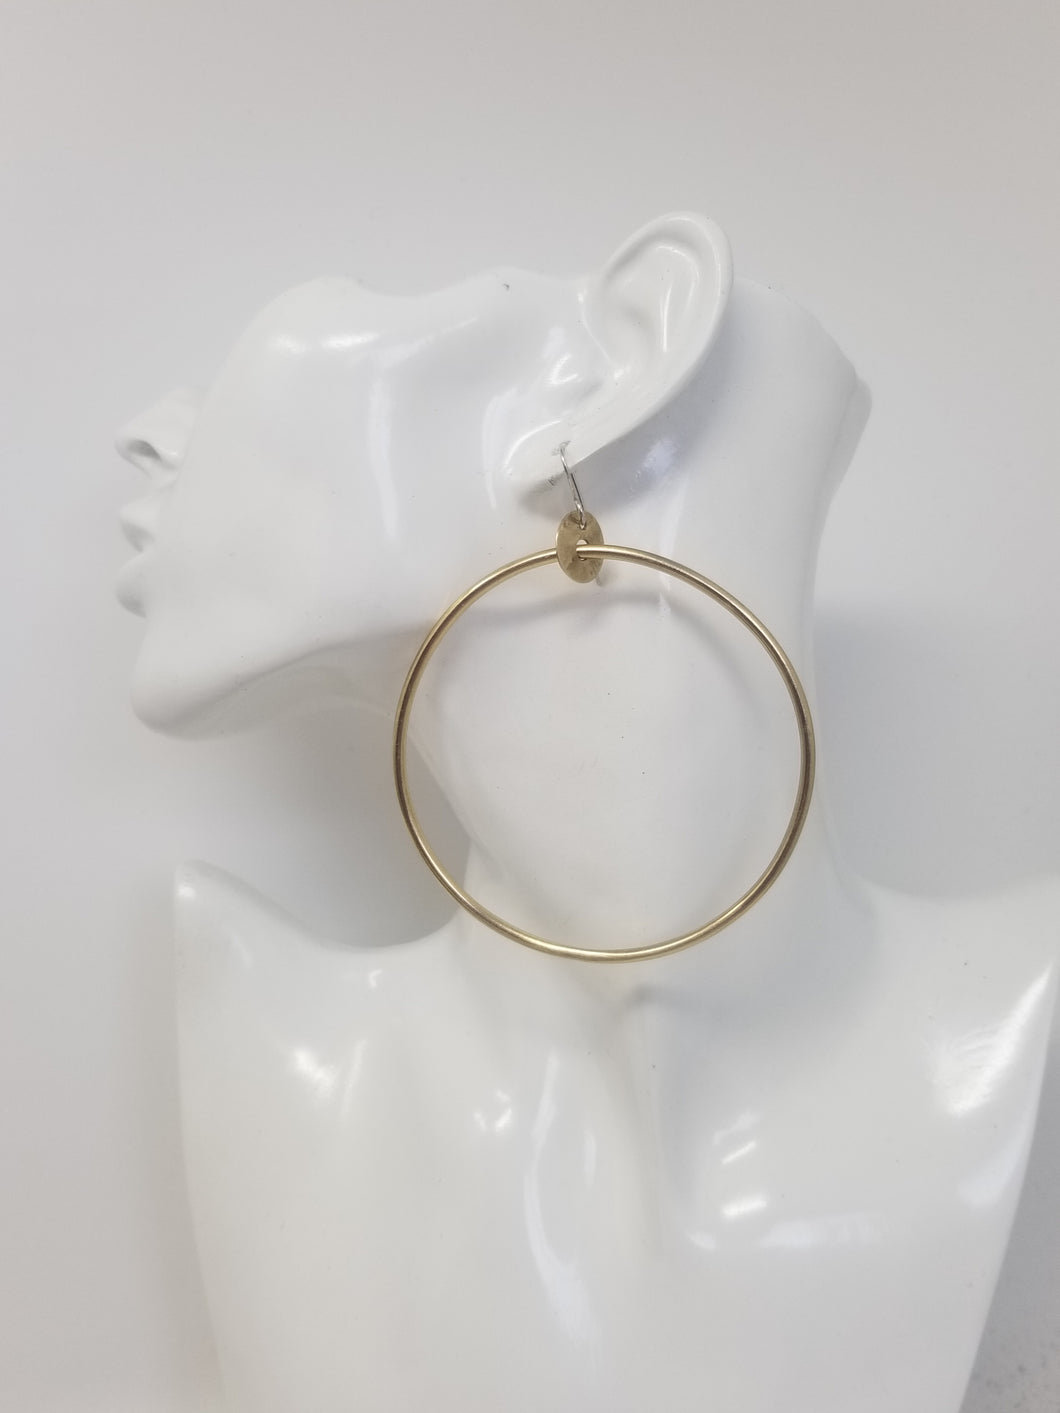 Large 3 inch Brass Hoop Earrings, Classy and Minimalist Gold Metal Hoops with handmade Sterling Silver Ear Wires.